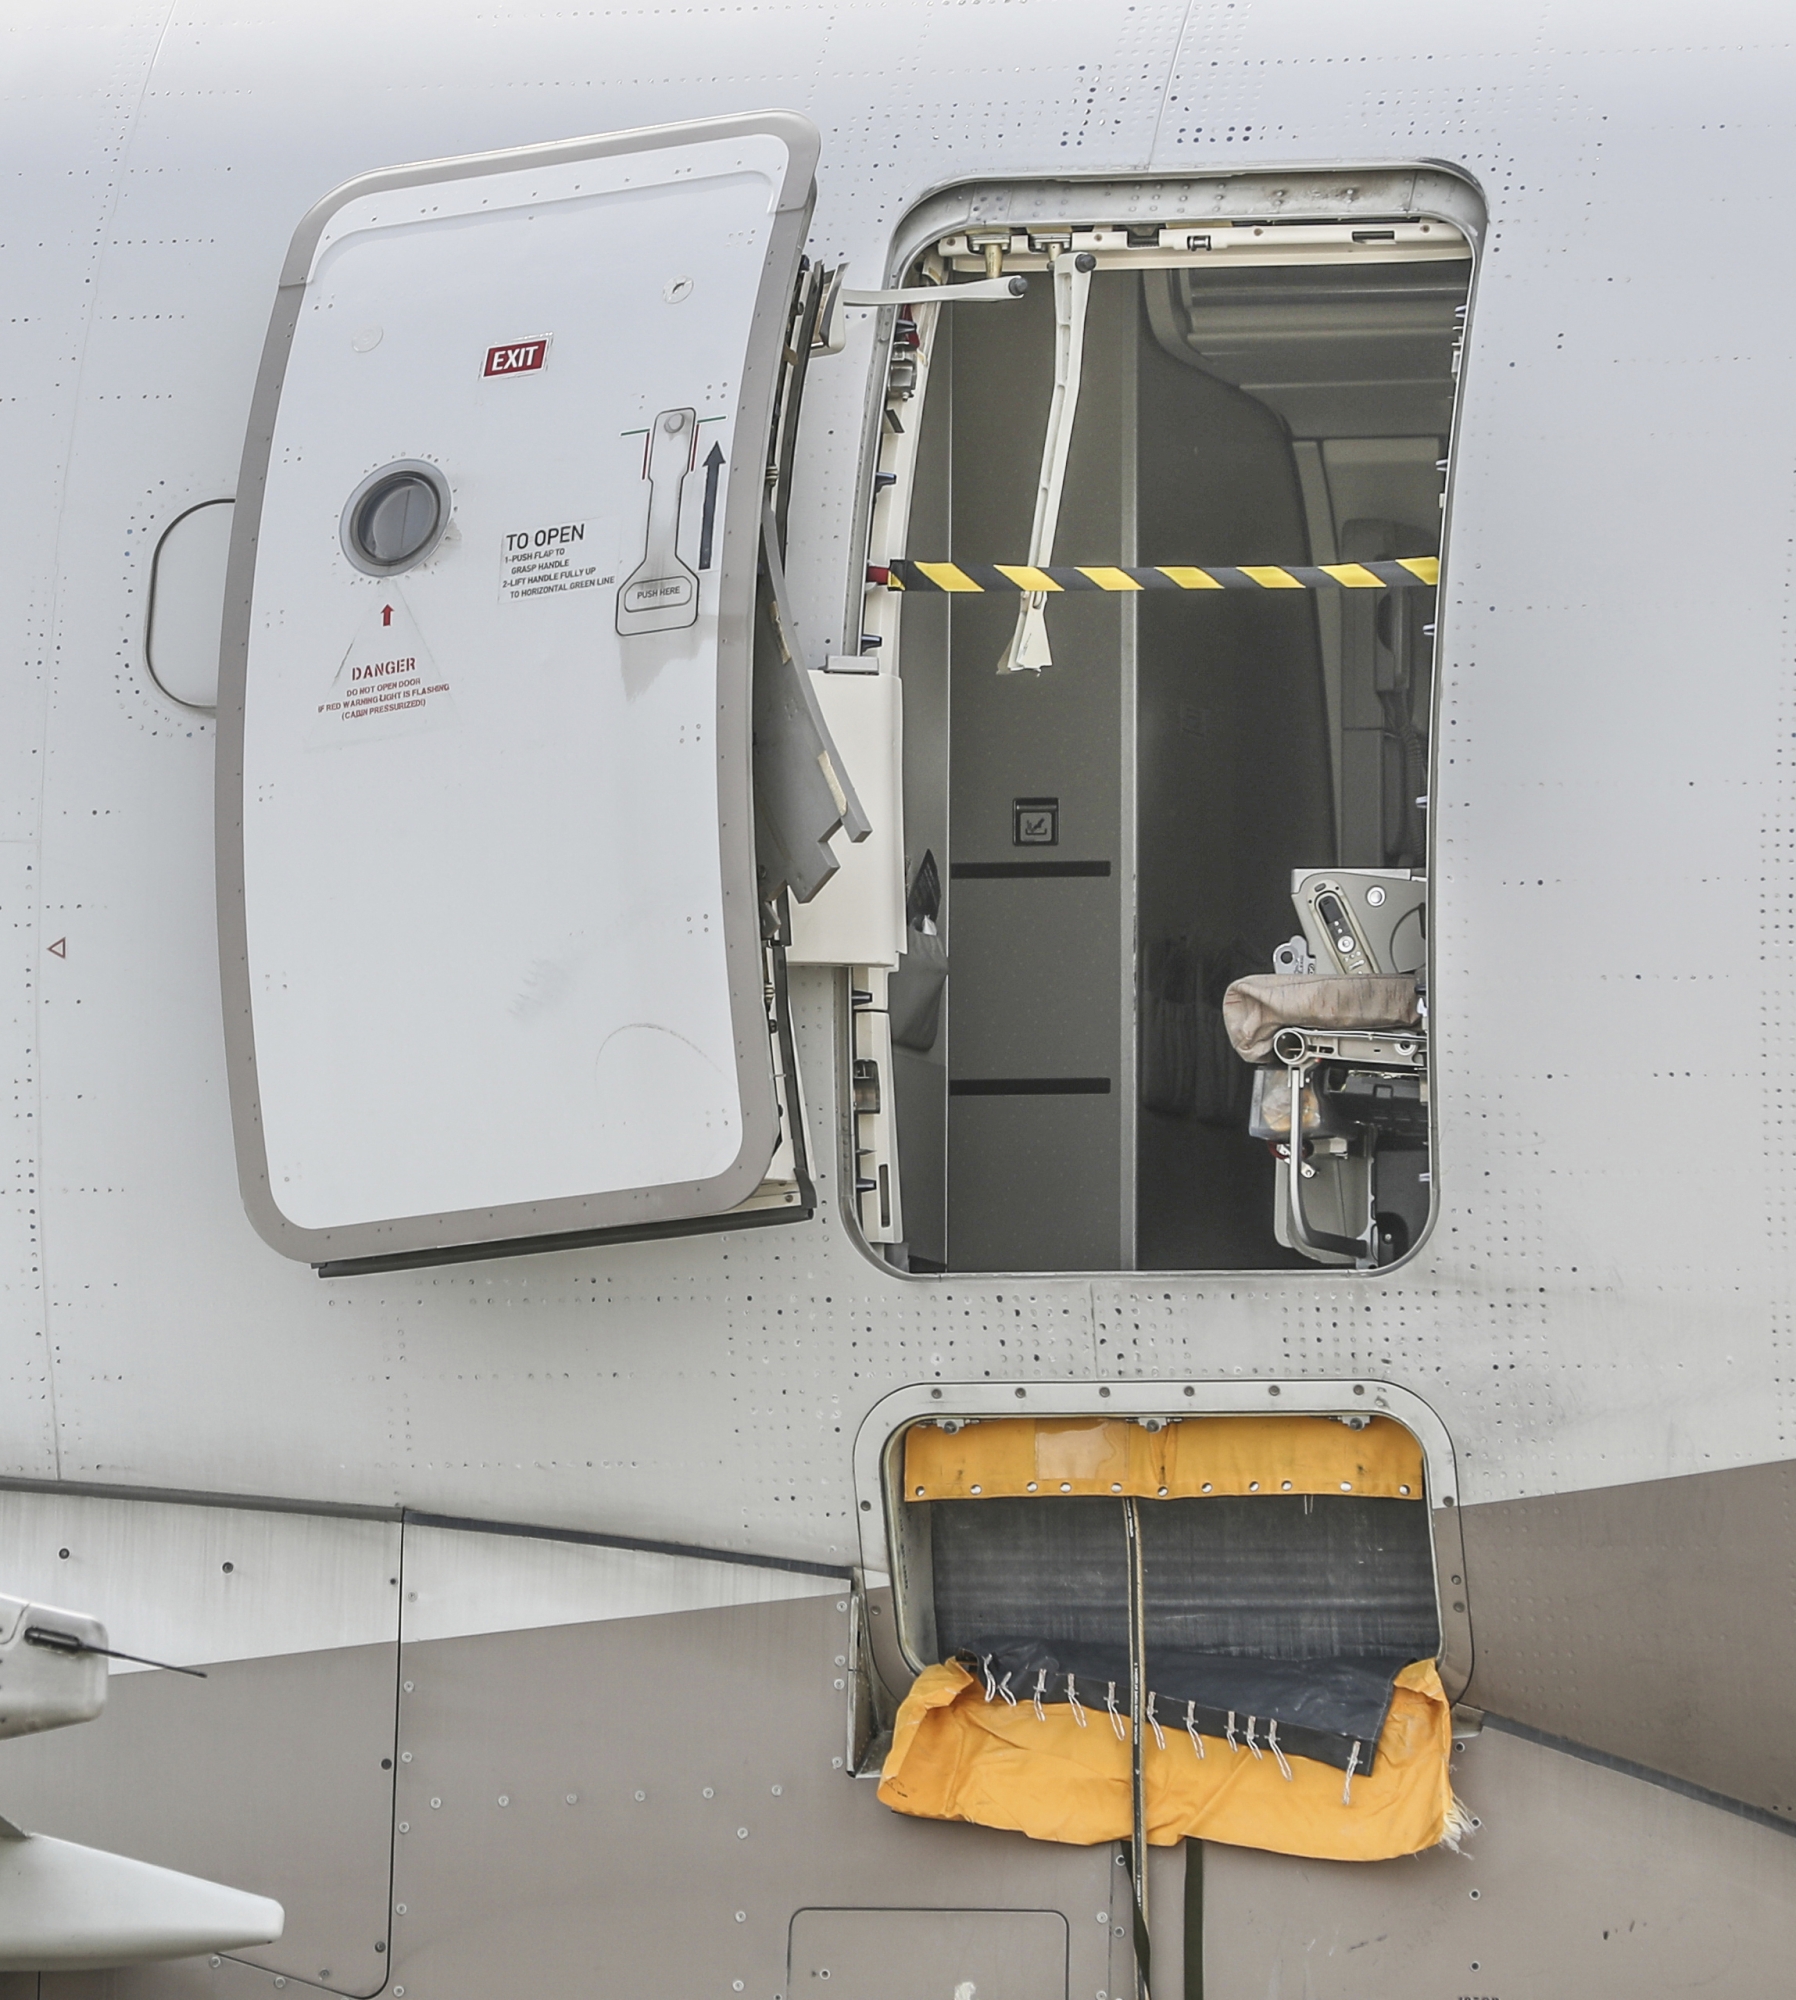 An emergency exit door of an Asiana Airlines plane is seen at Daegu International Airport in Daegu, South Korea, Friday, May 26, 2023, after a passenger opened it during a flight. A passenger opened the emergency exit door during a South Korean flight Friday, causing air to gust inside the cabin before the plane landed safely, airline and government officials said. (Yun Kwan-shick/Yonhap via AP)